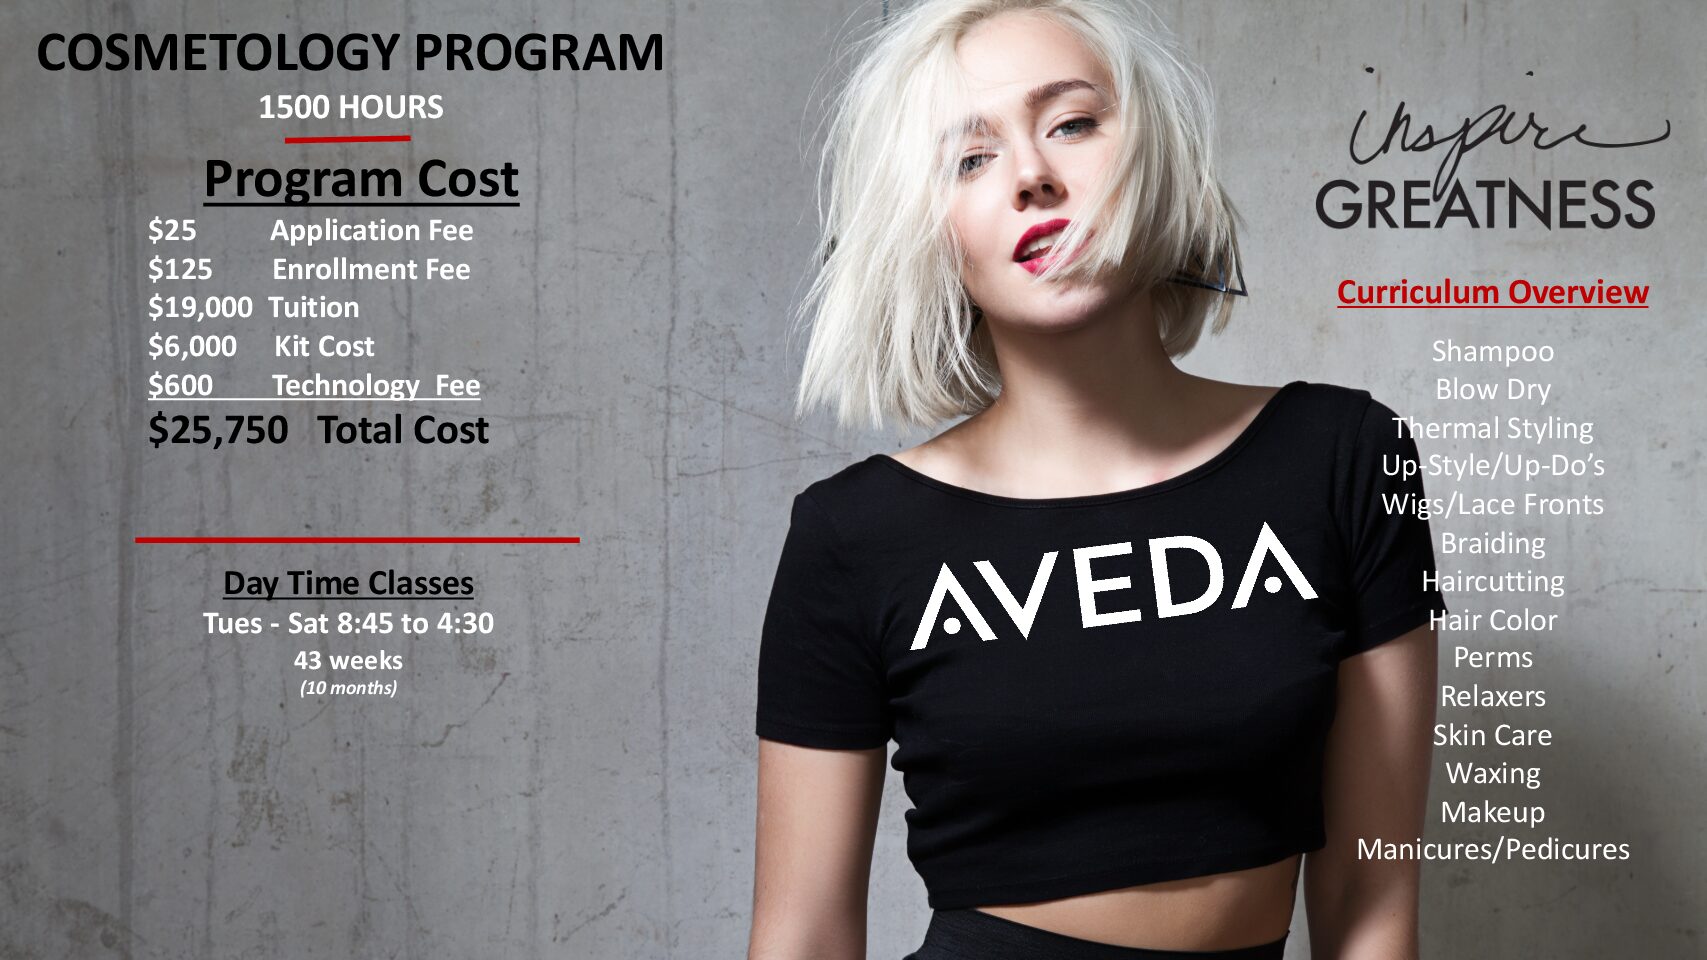 Aveda Institute Cosmetology School in Maryland Cost and Curriculum